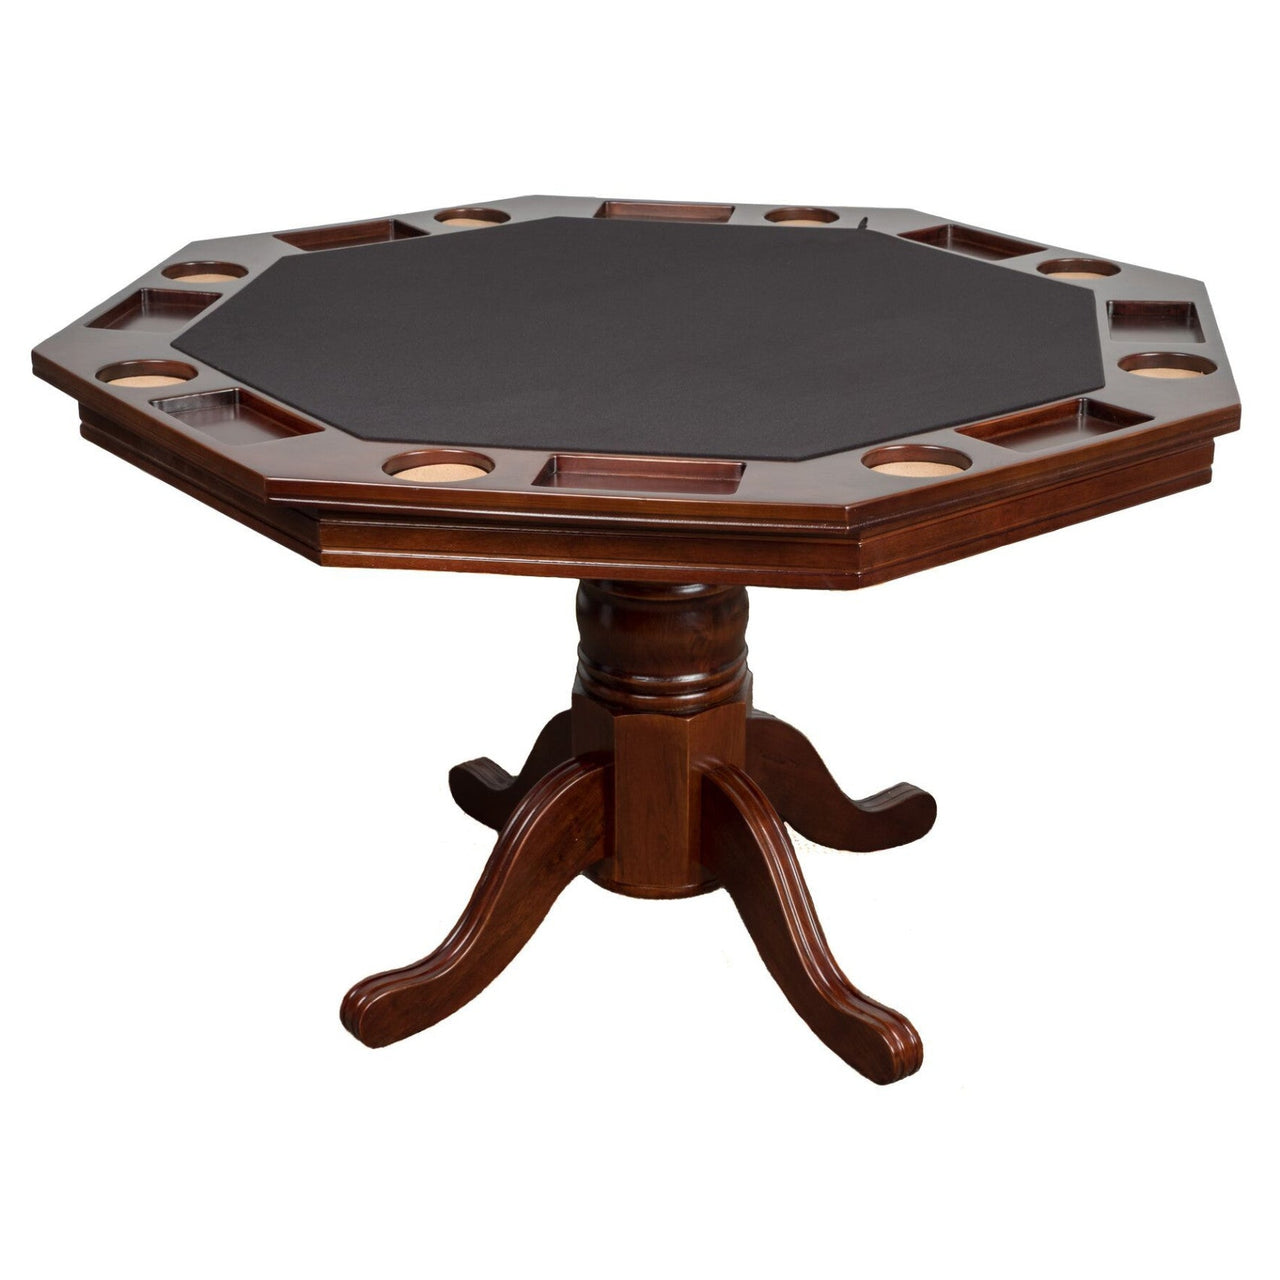 Presidential Billiards Octagonal Poker Table with Dining Top-AMERICANA-POKER-TABLES